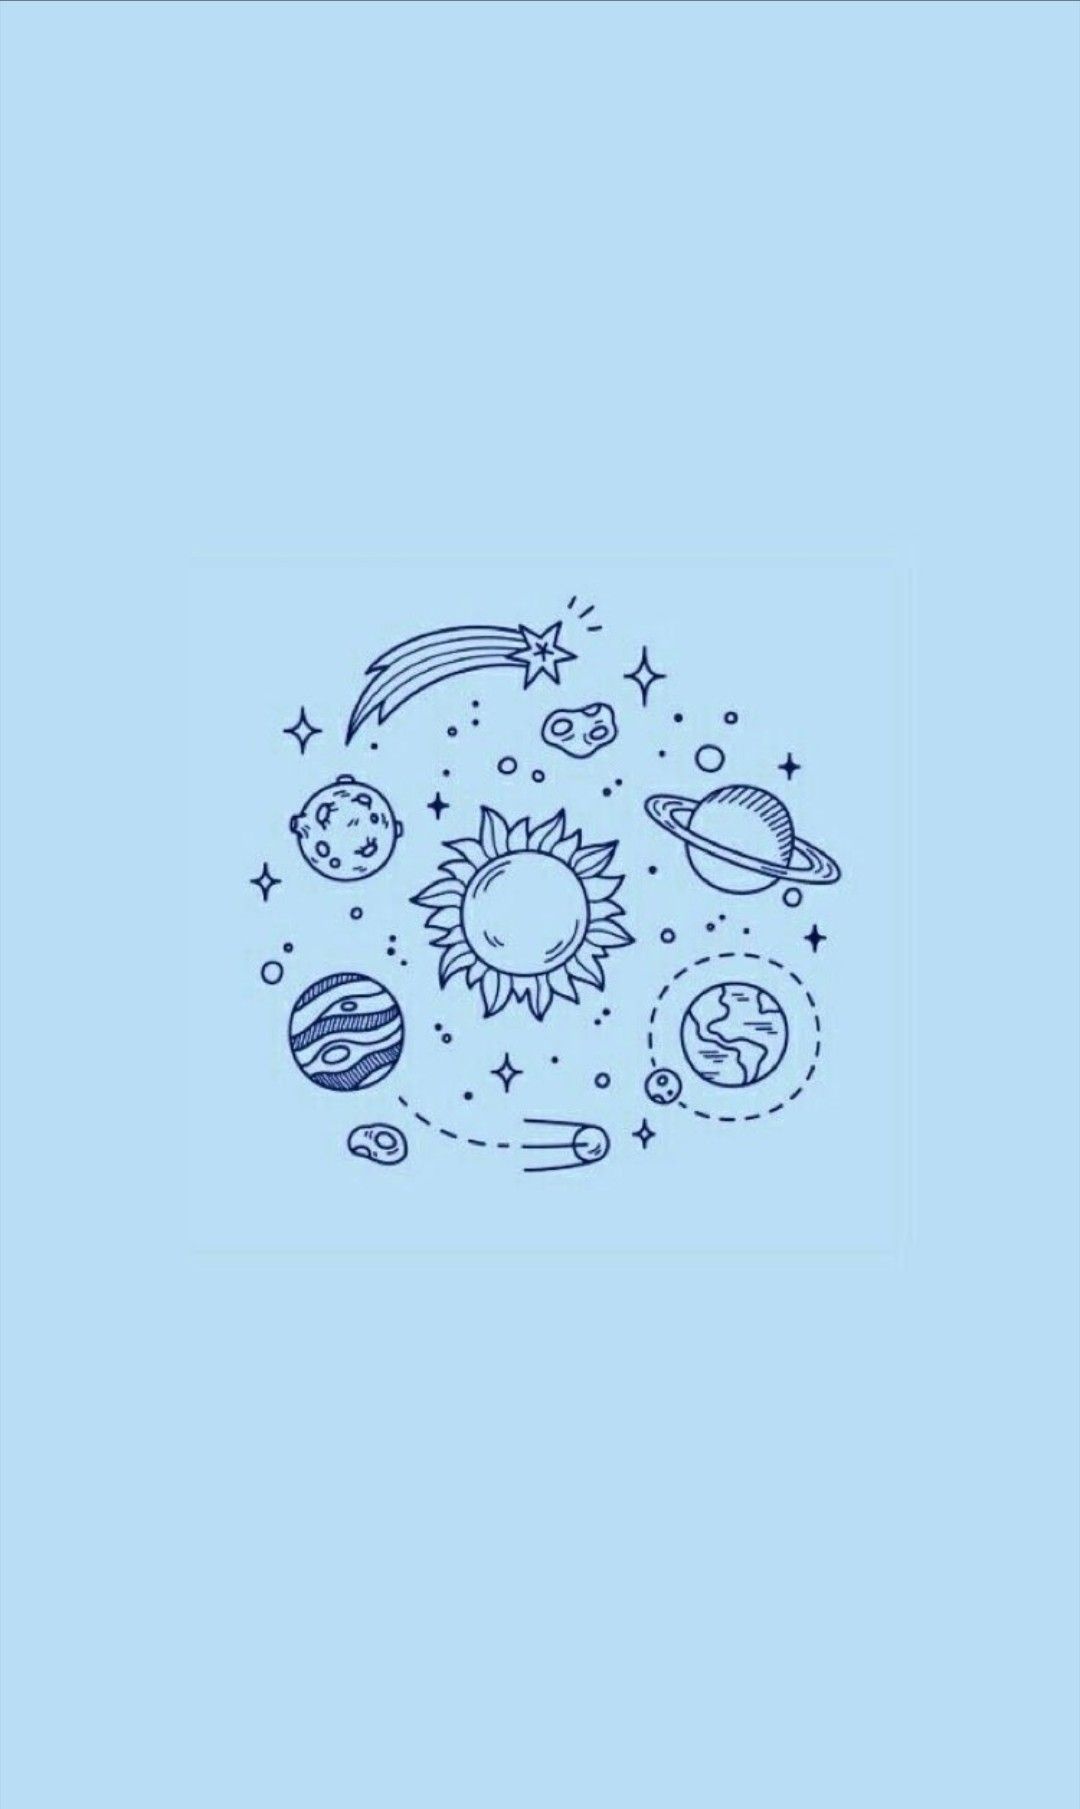 A space themed logo with planets and stars - Pastel blue, cute iPhone